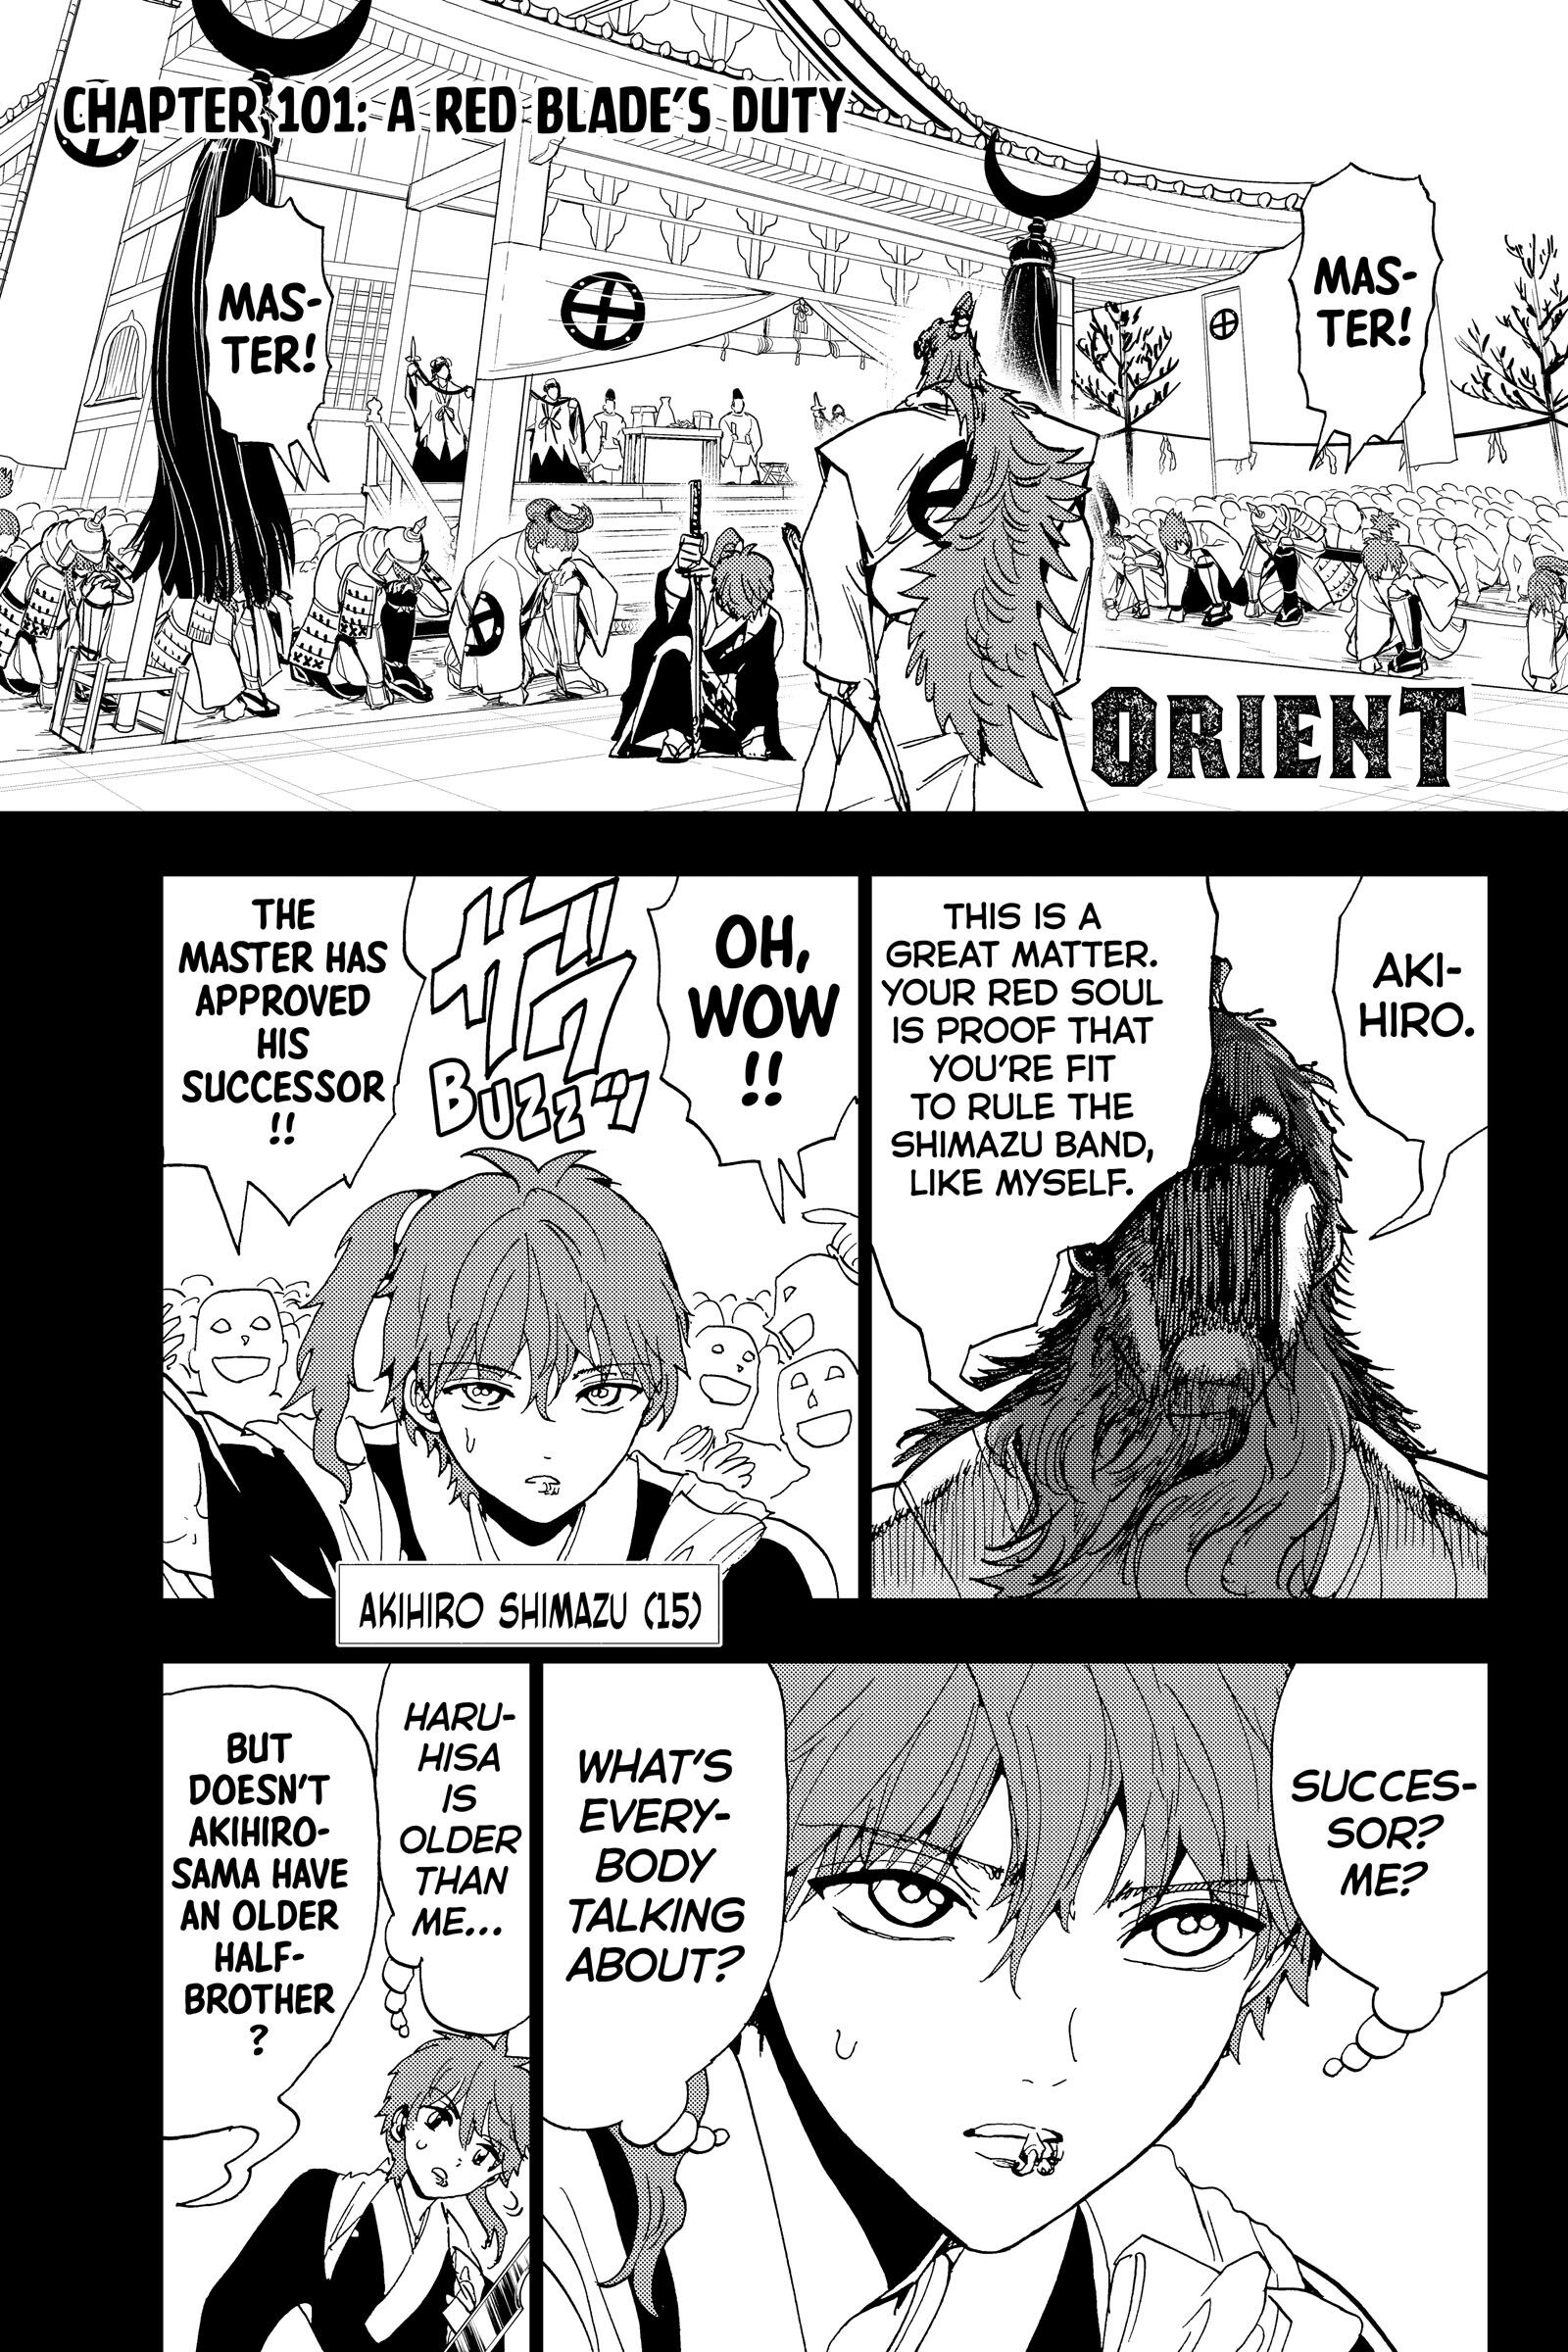 Orient - Page 2